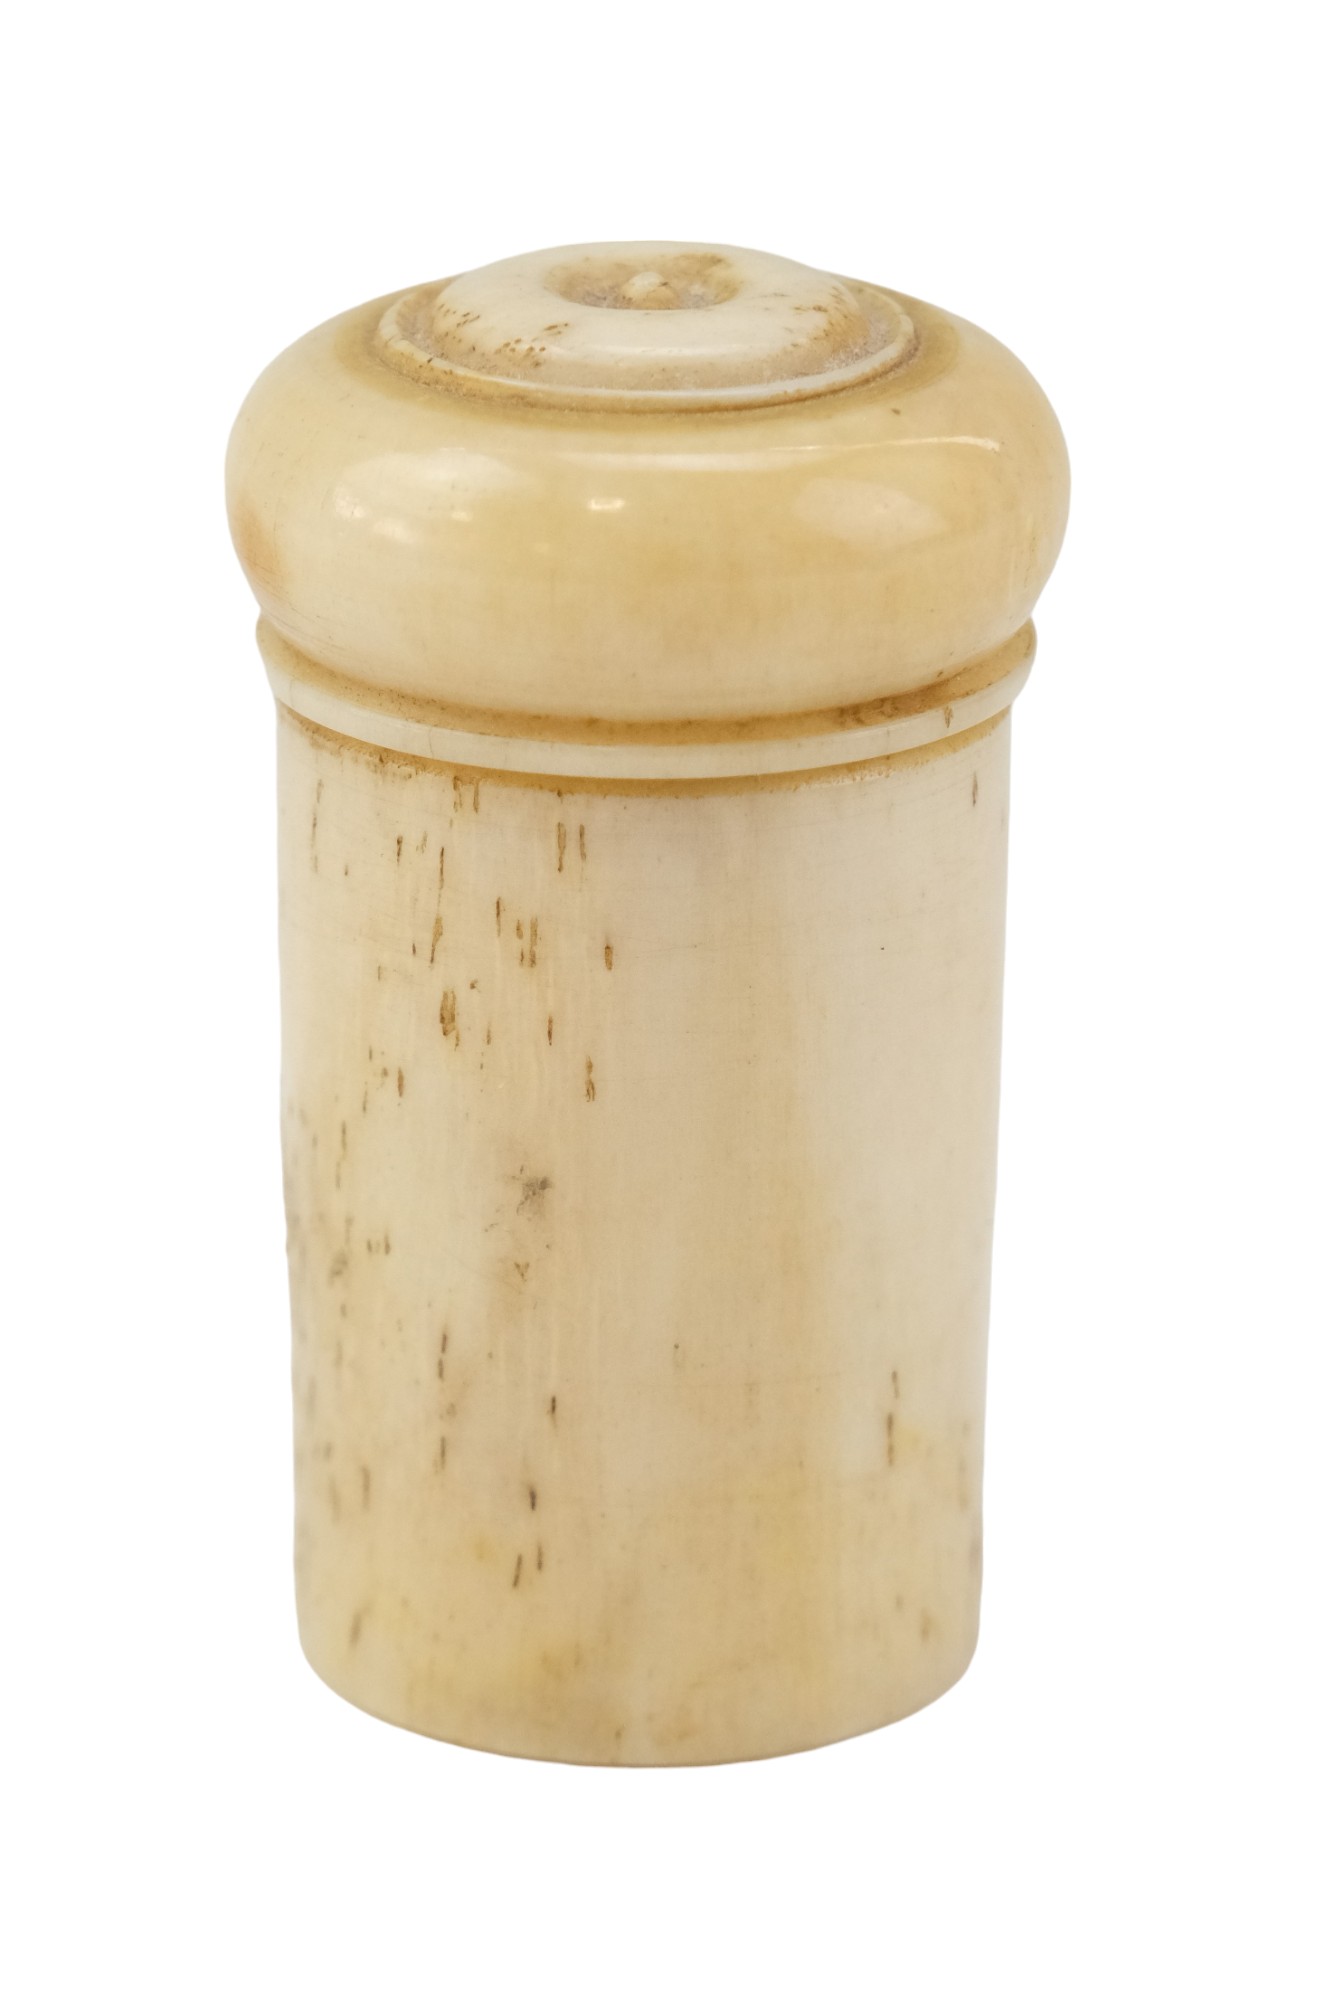 An early 19th Century turned bone screw-capped container, likely from a gun case, height 5 cm